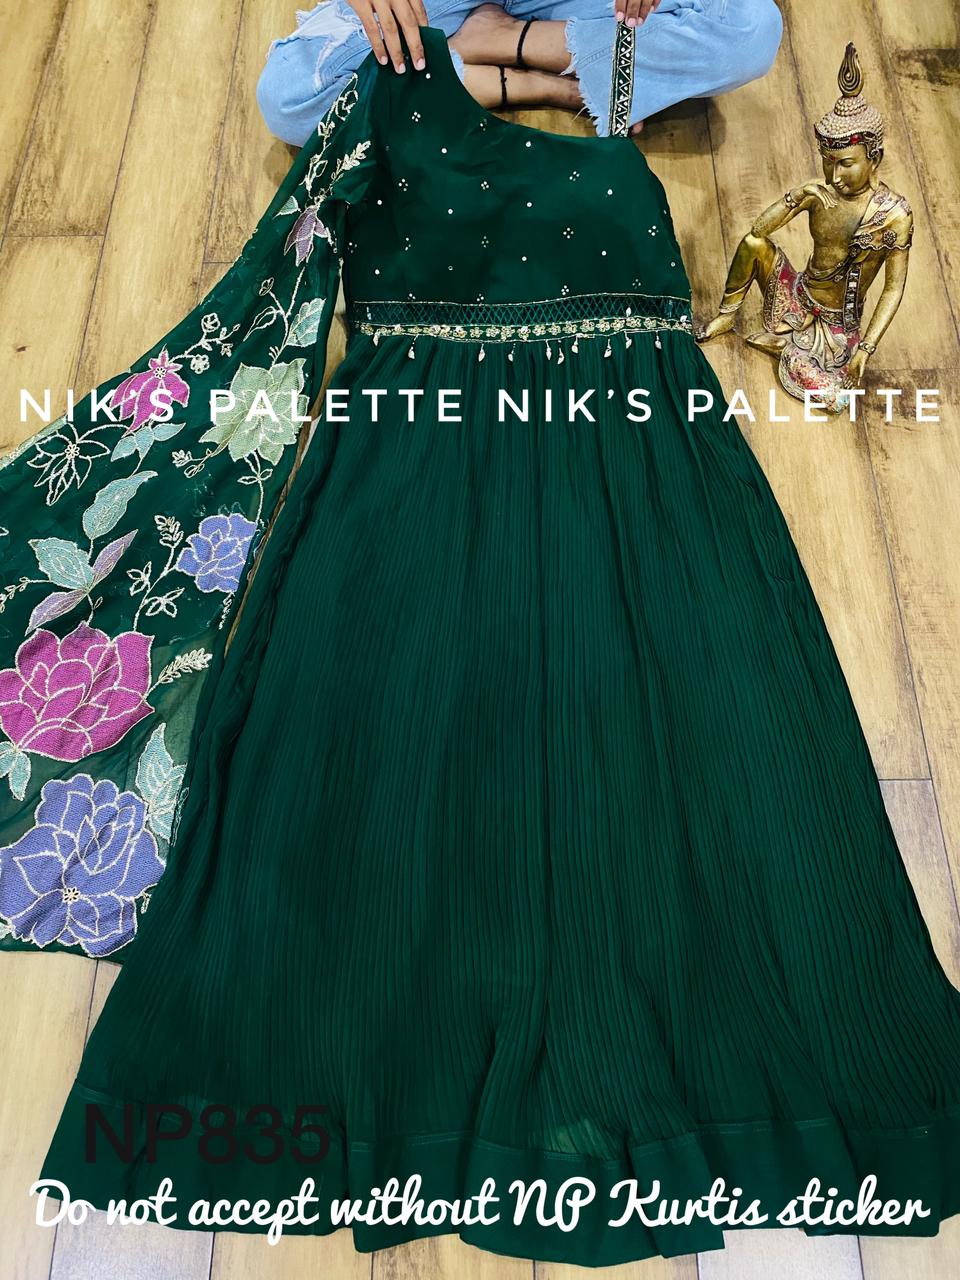 Niks collection: bottle green gown